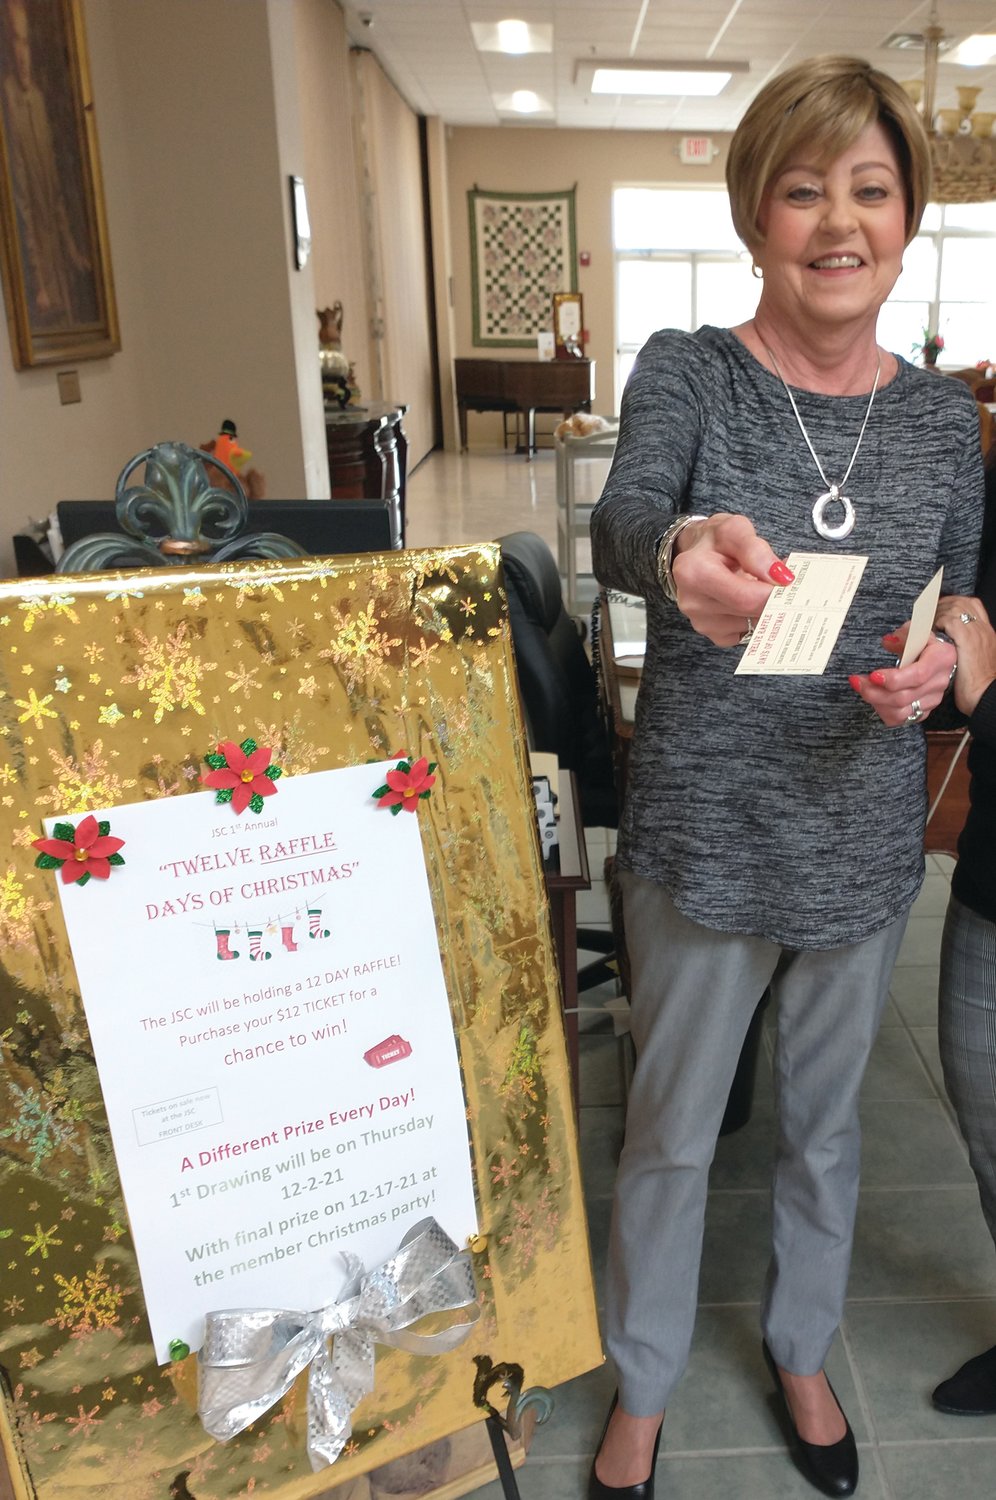 PARTRIDGE IN A PEAR TREE: Gail Krikorian holds a raffle ticket in anticipation the first day of “Twelve Raffle Days of Christmas,”  when a drawing will be held each weekday for 12 days from Thursday, Dec. 2 until Friday Dec. 17.